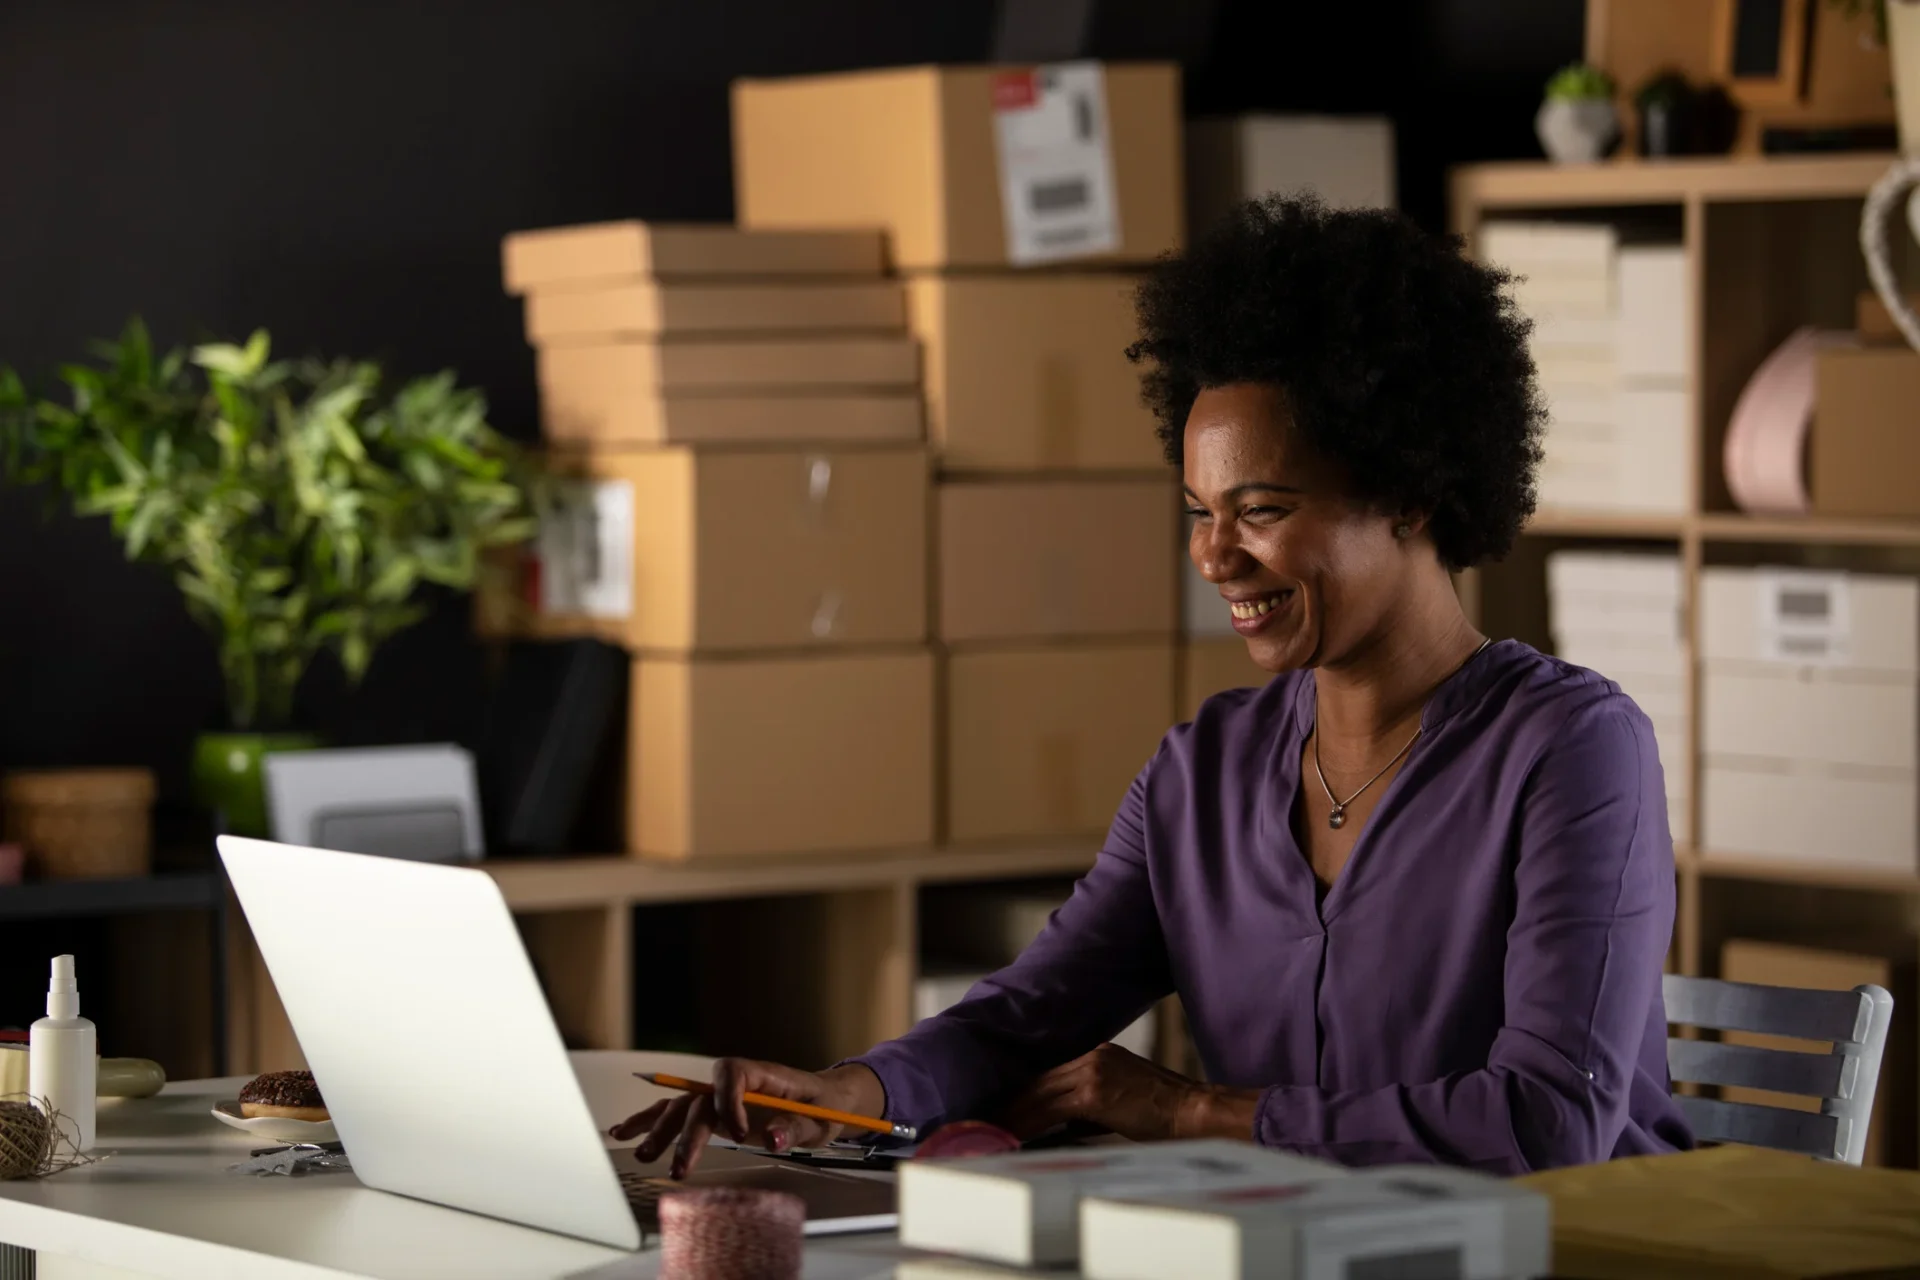 Woman on laptop smiling with parcels in background